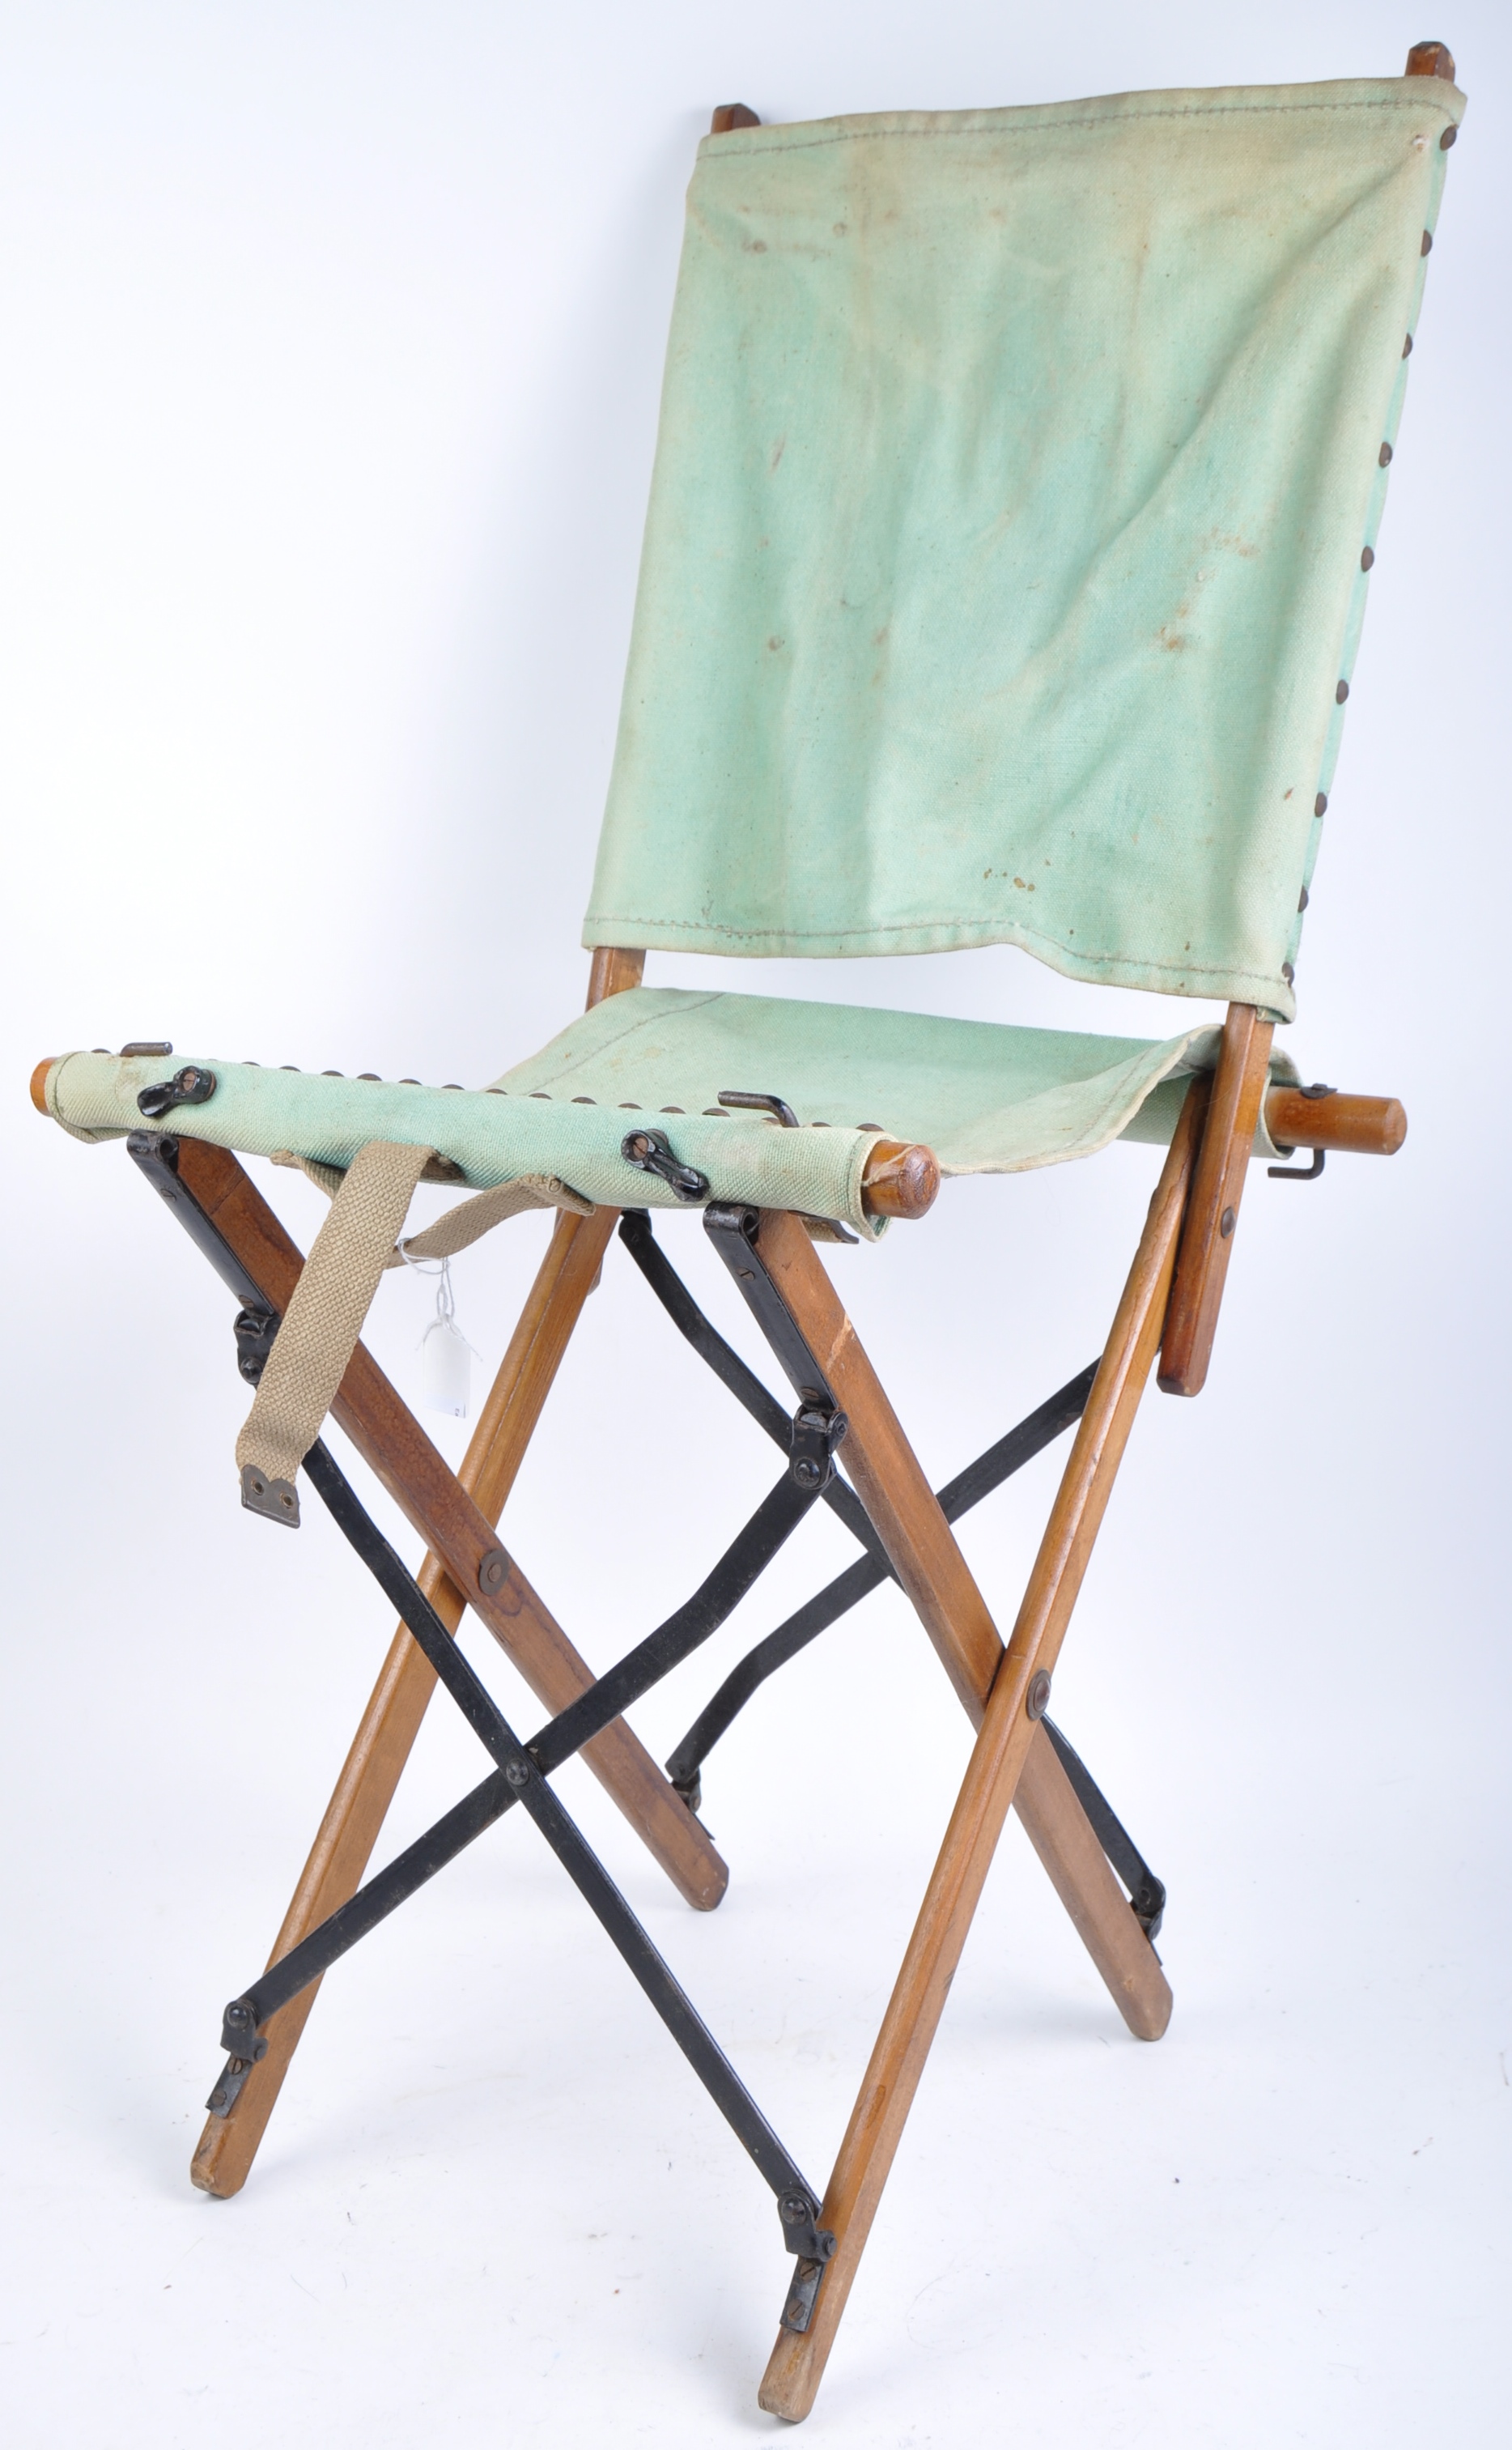 WWII SECOND WORLD WAR BRITISH ARMY FOLDING CAMPAIGN CHAIR